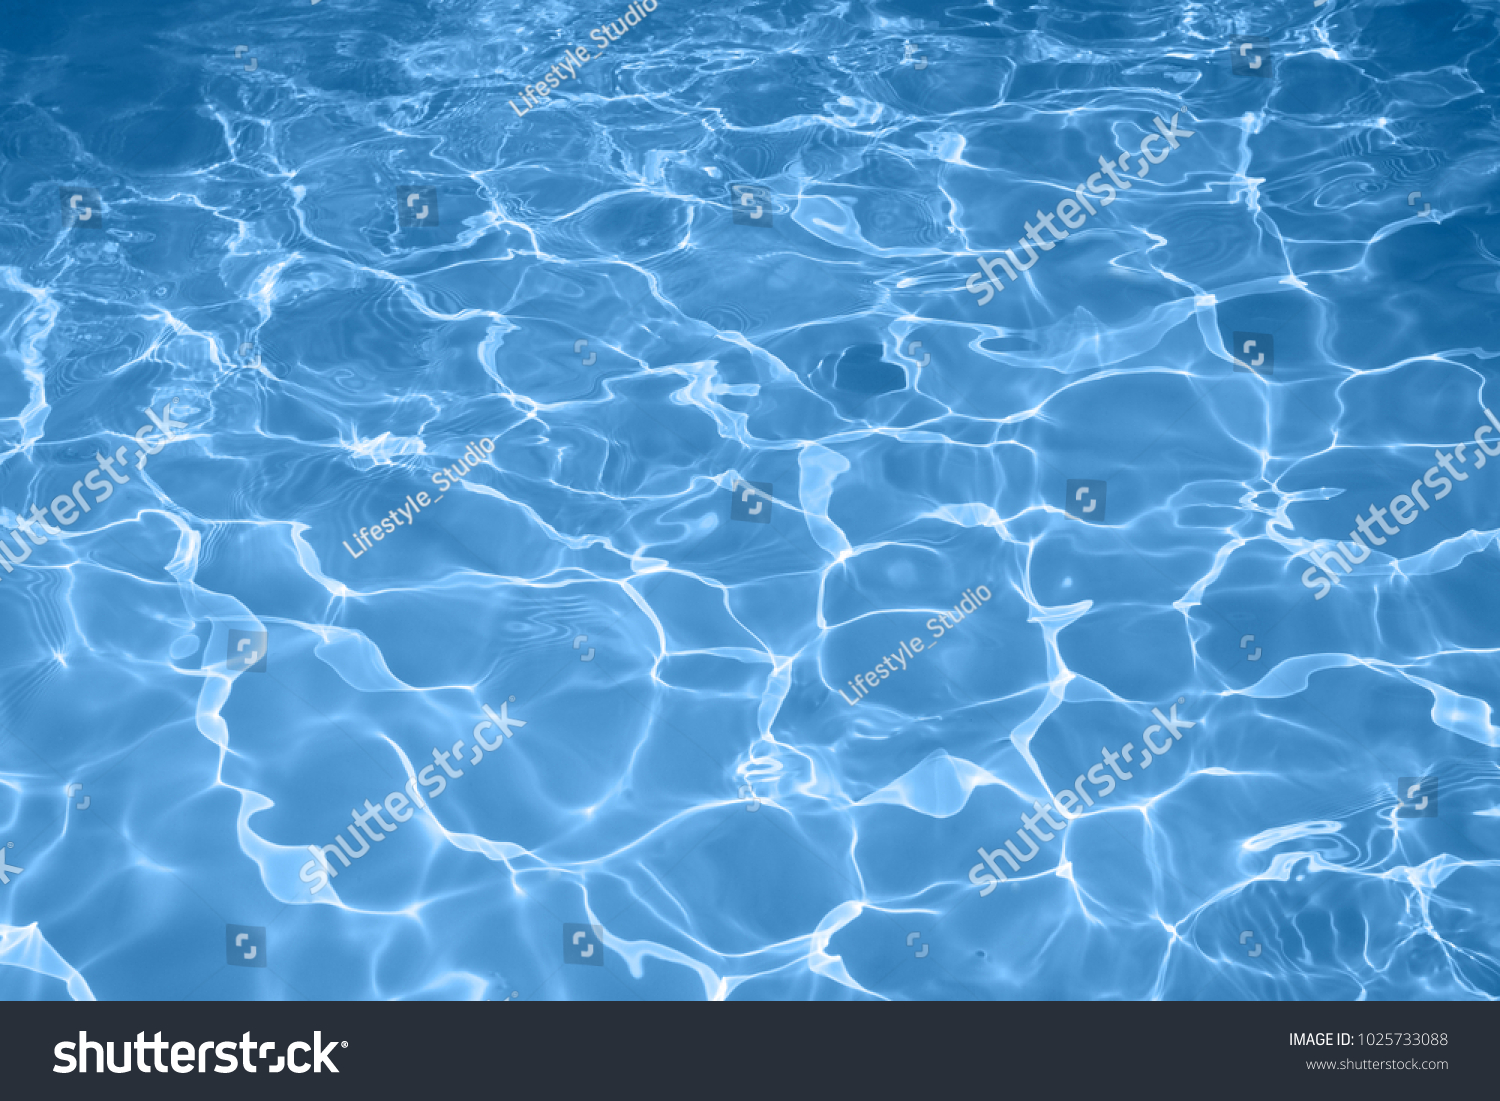 Surface of blue swimming pool, Water nature background for design #1025733088